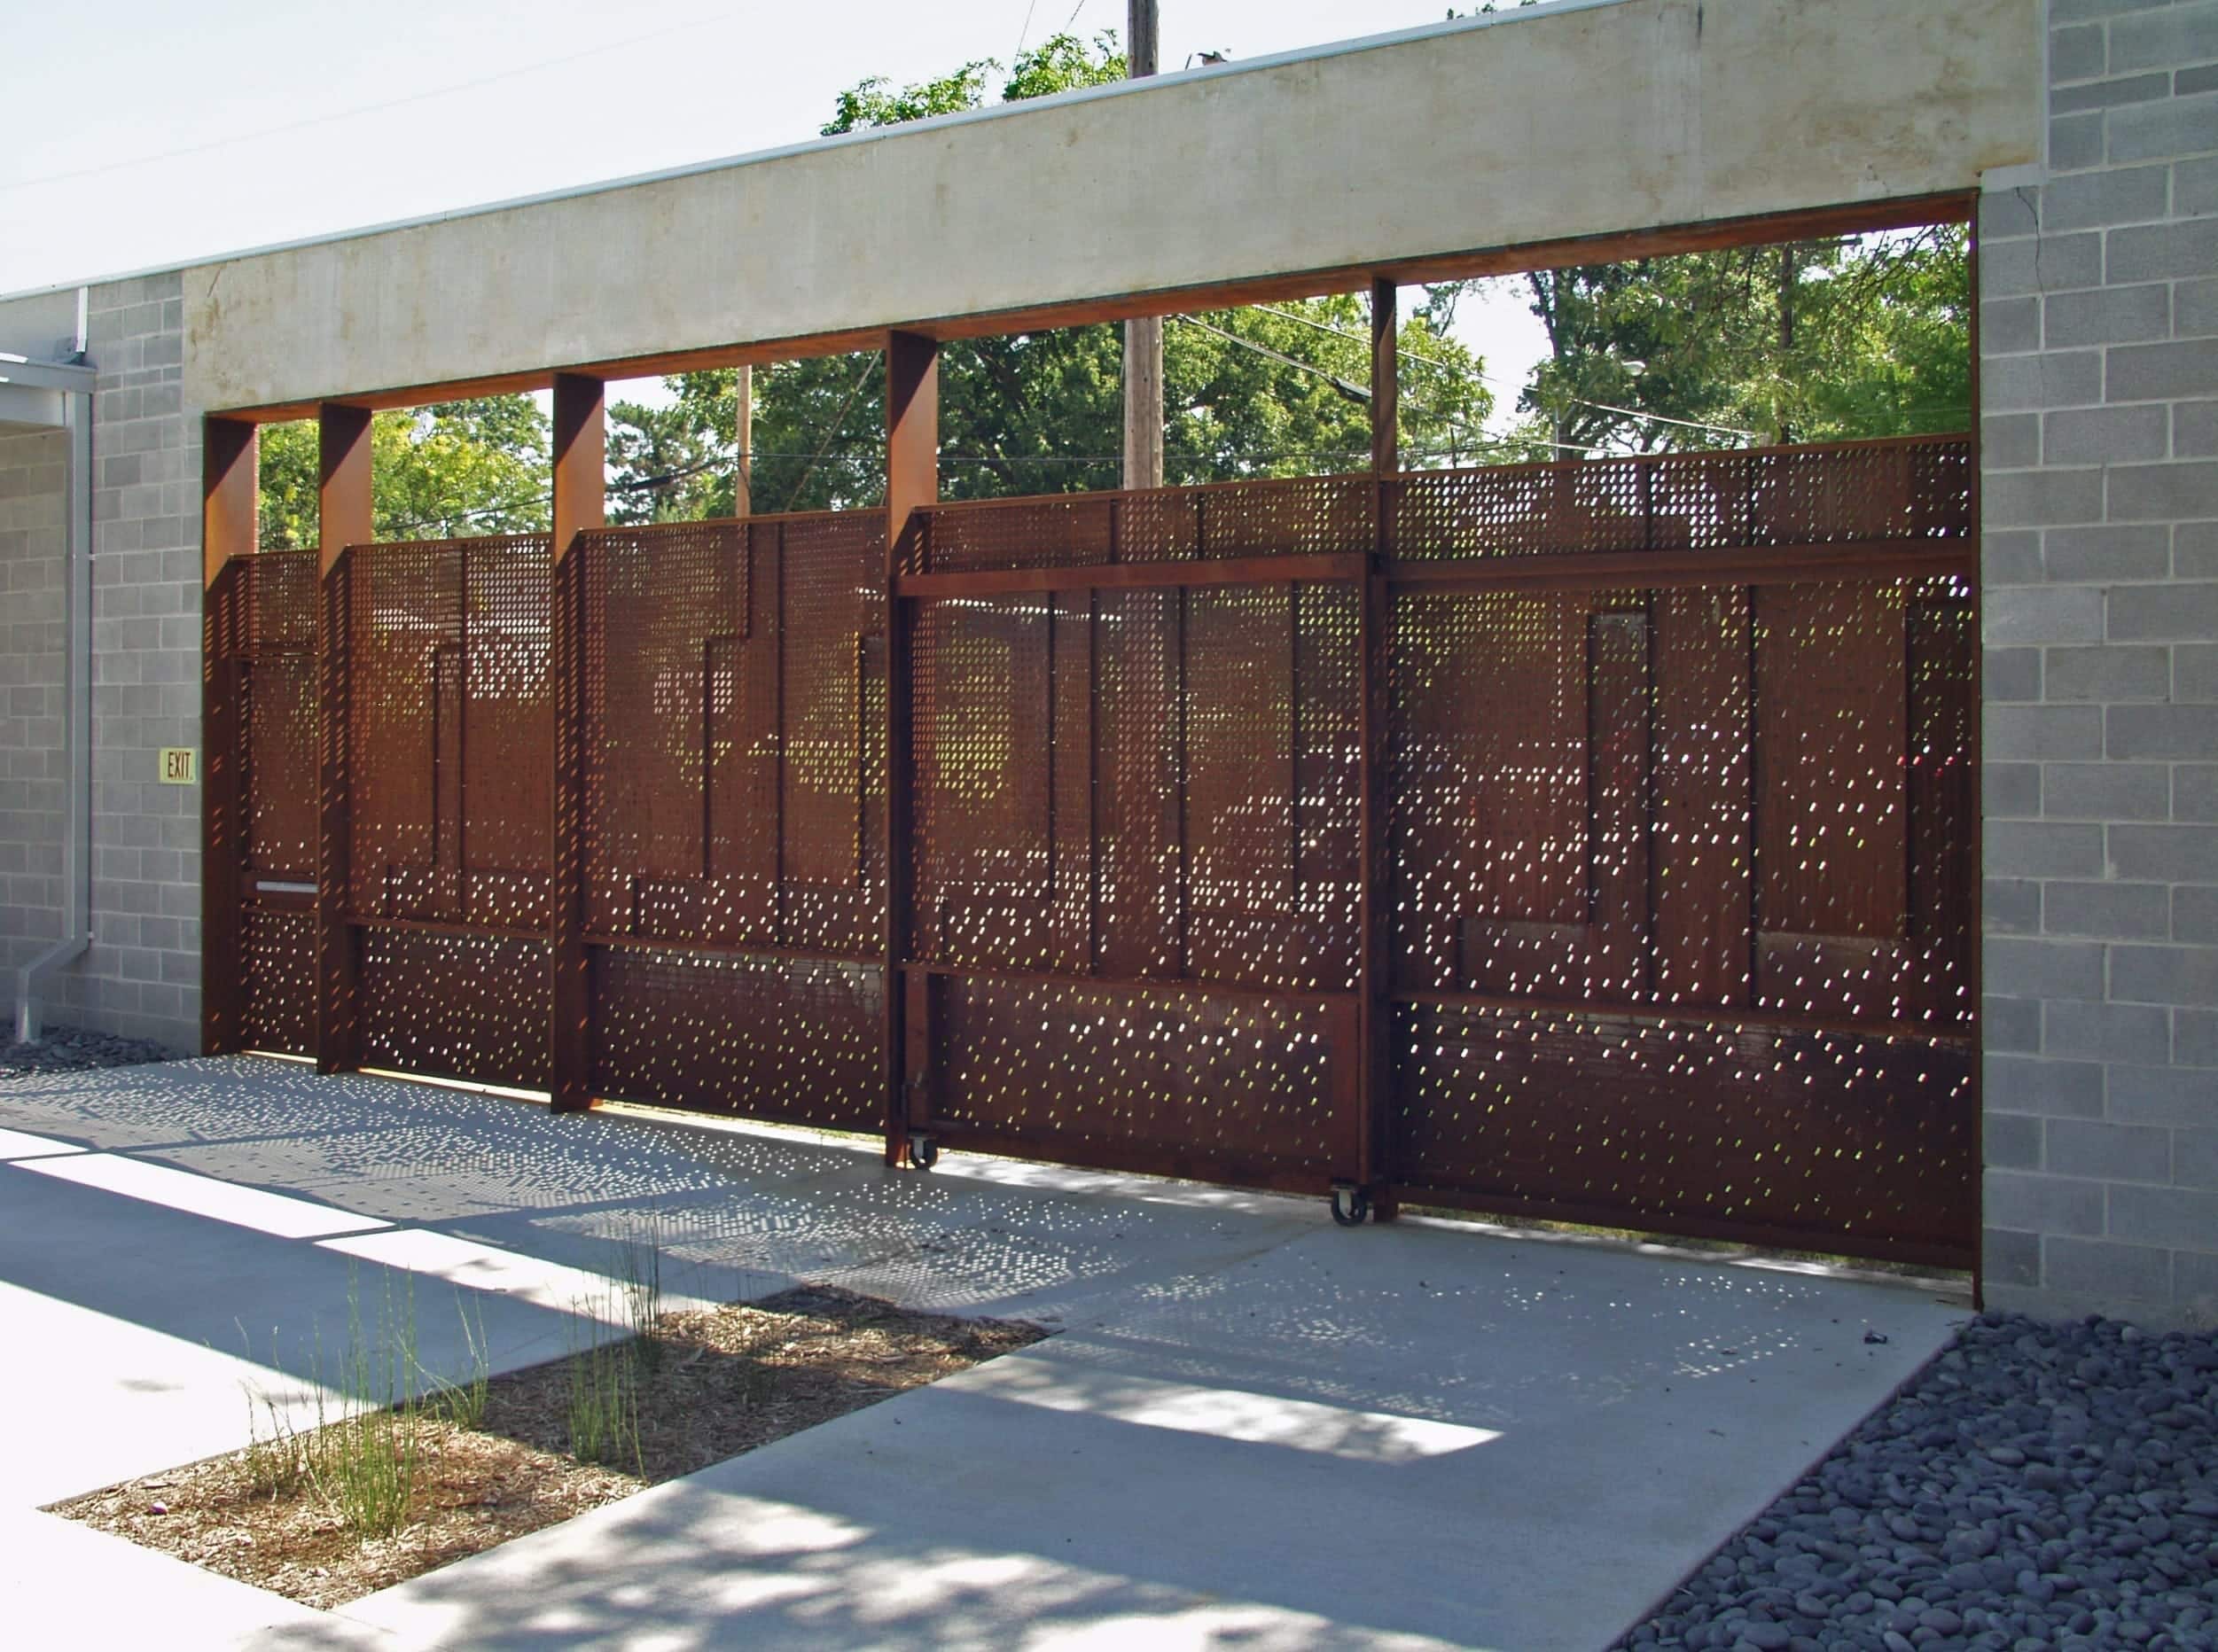 Light enters the space through the custom perforated steel for the Irving Courtyard screenwall at KCAI.